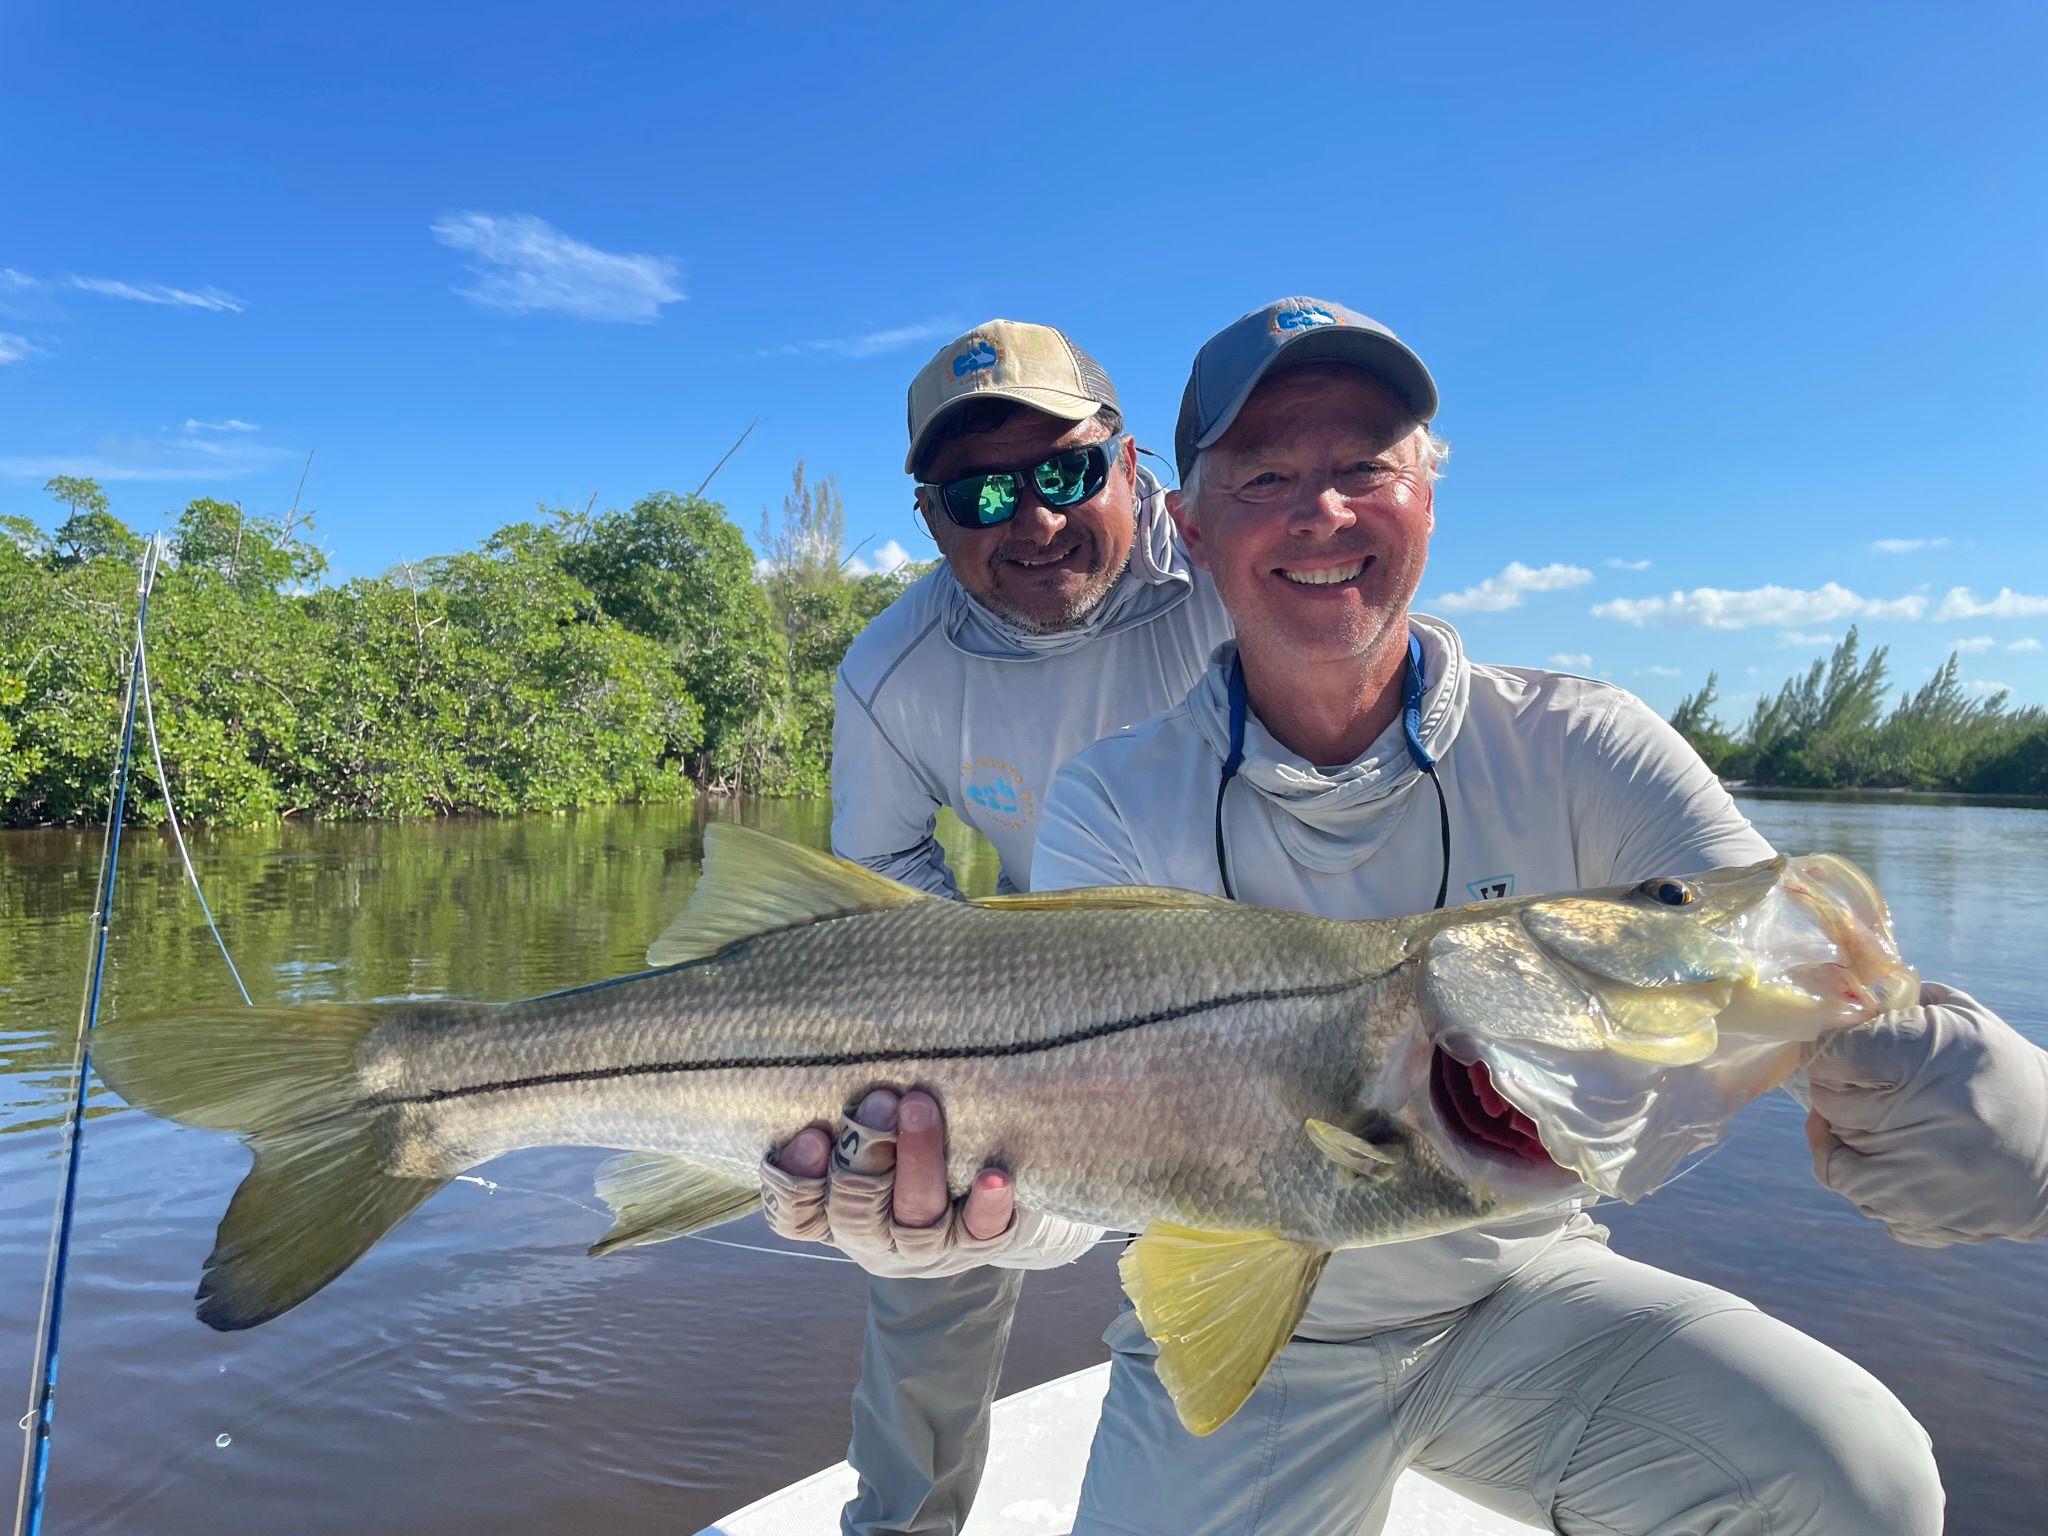 ESB Angler & Guide with Snook